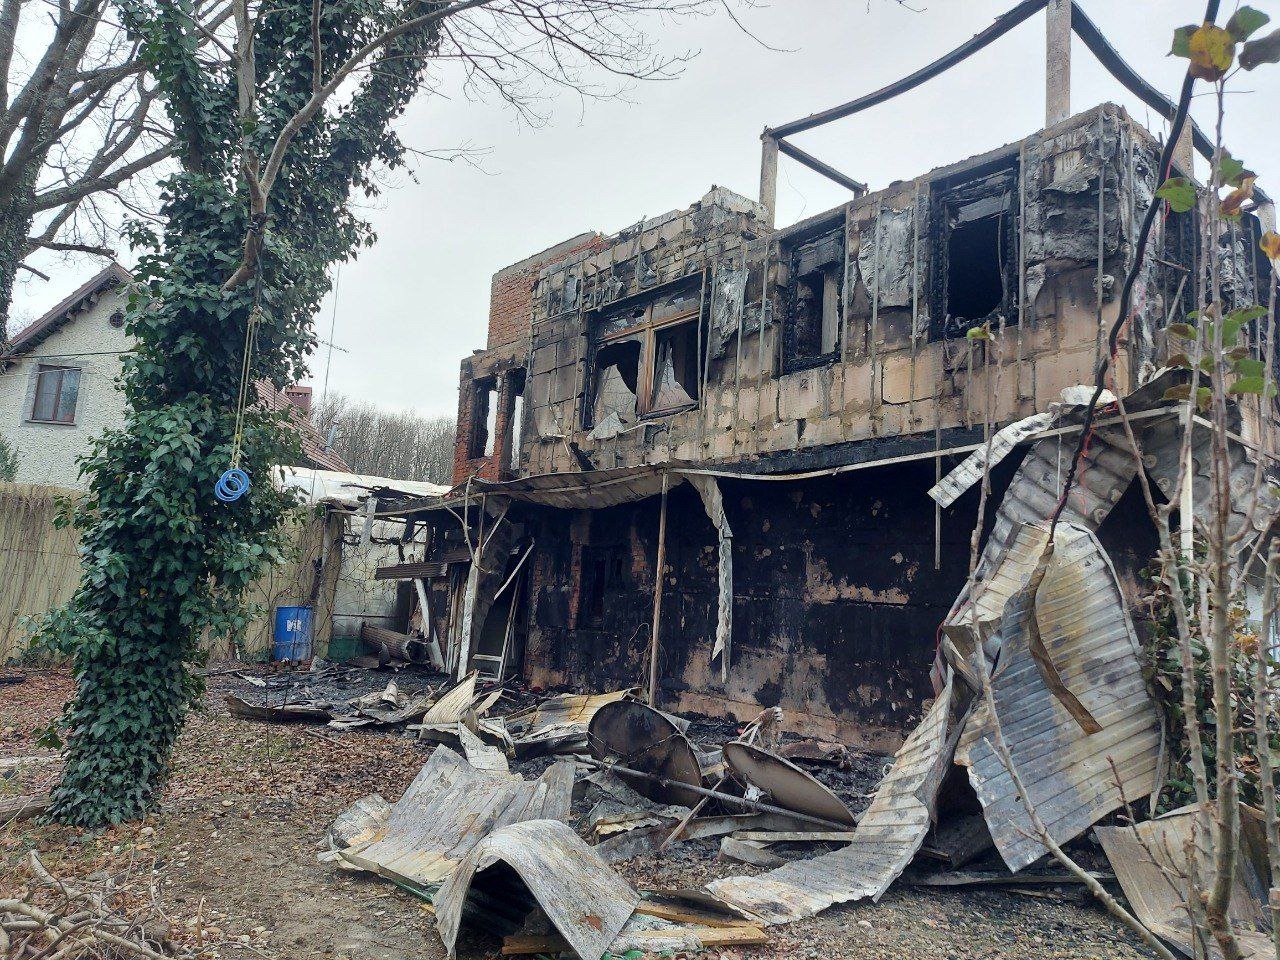 Andrei Paniushkin's house in the Krasnodar area of Russia after it was burned